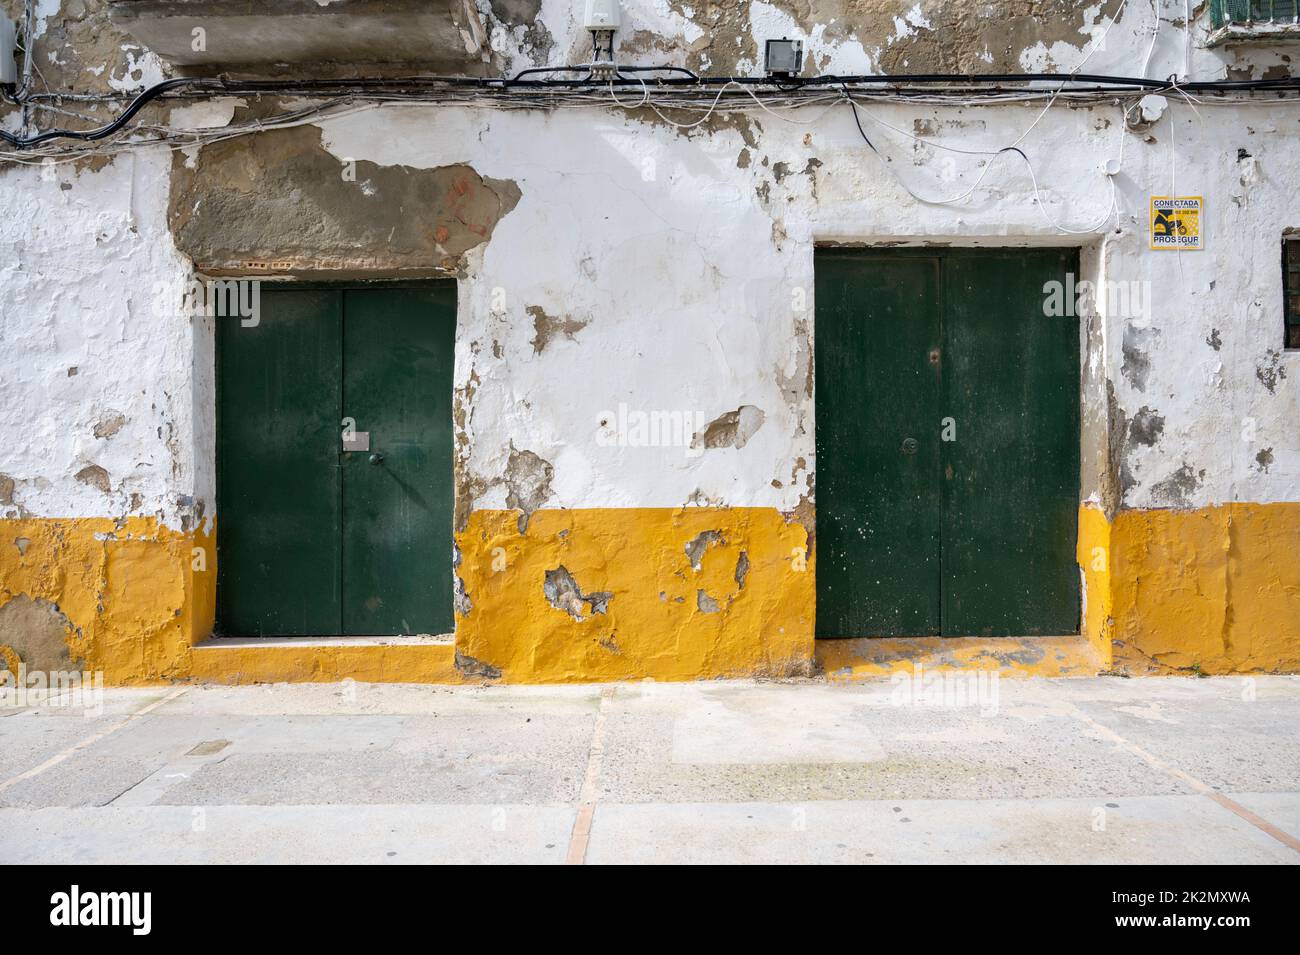 Old wooden doors painted green on a white building with yellow skirting in Spain Stock Photo